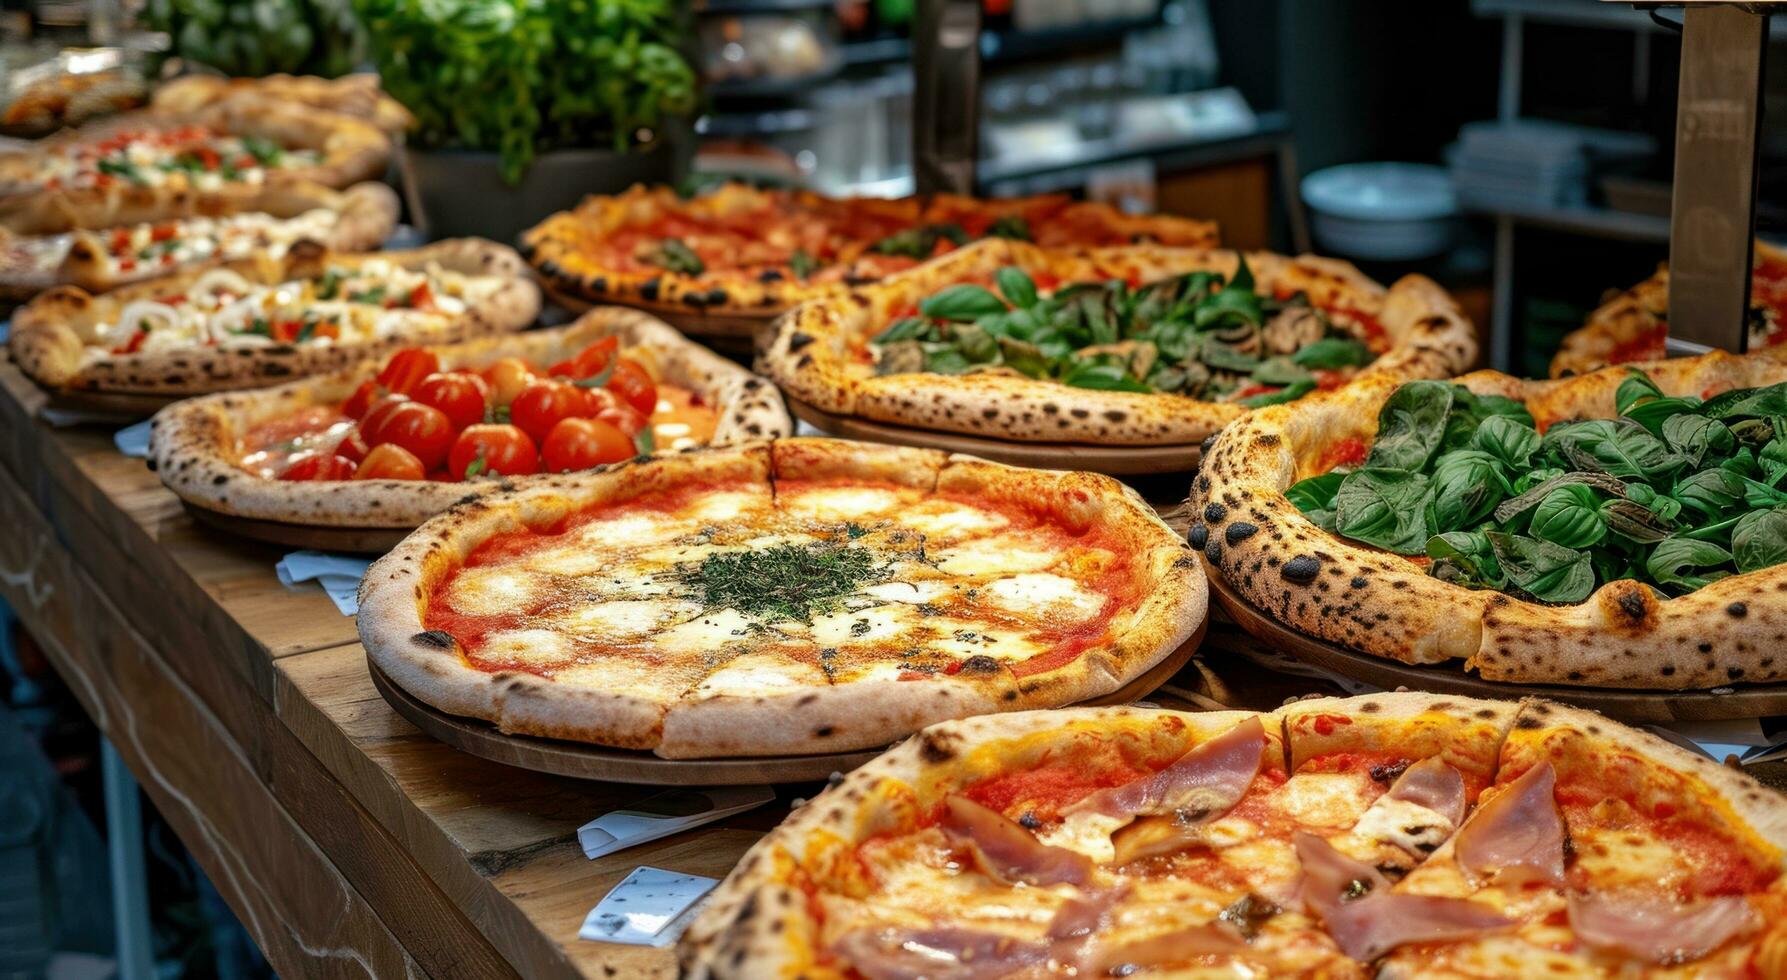 AI generated a table of pizzas and other Italian food on the counter photo